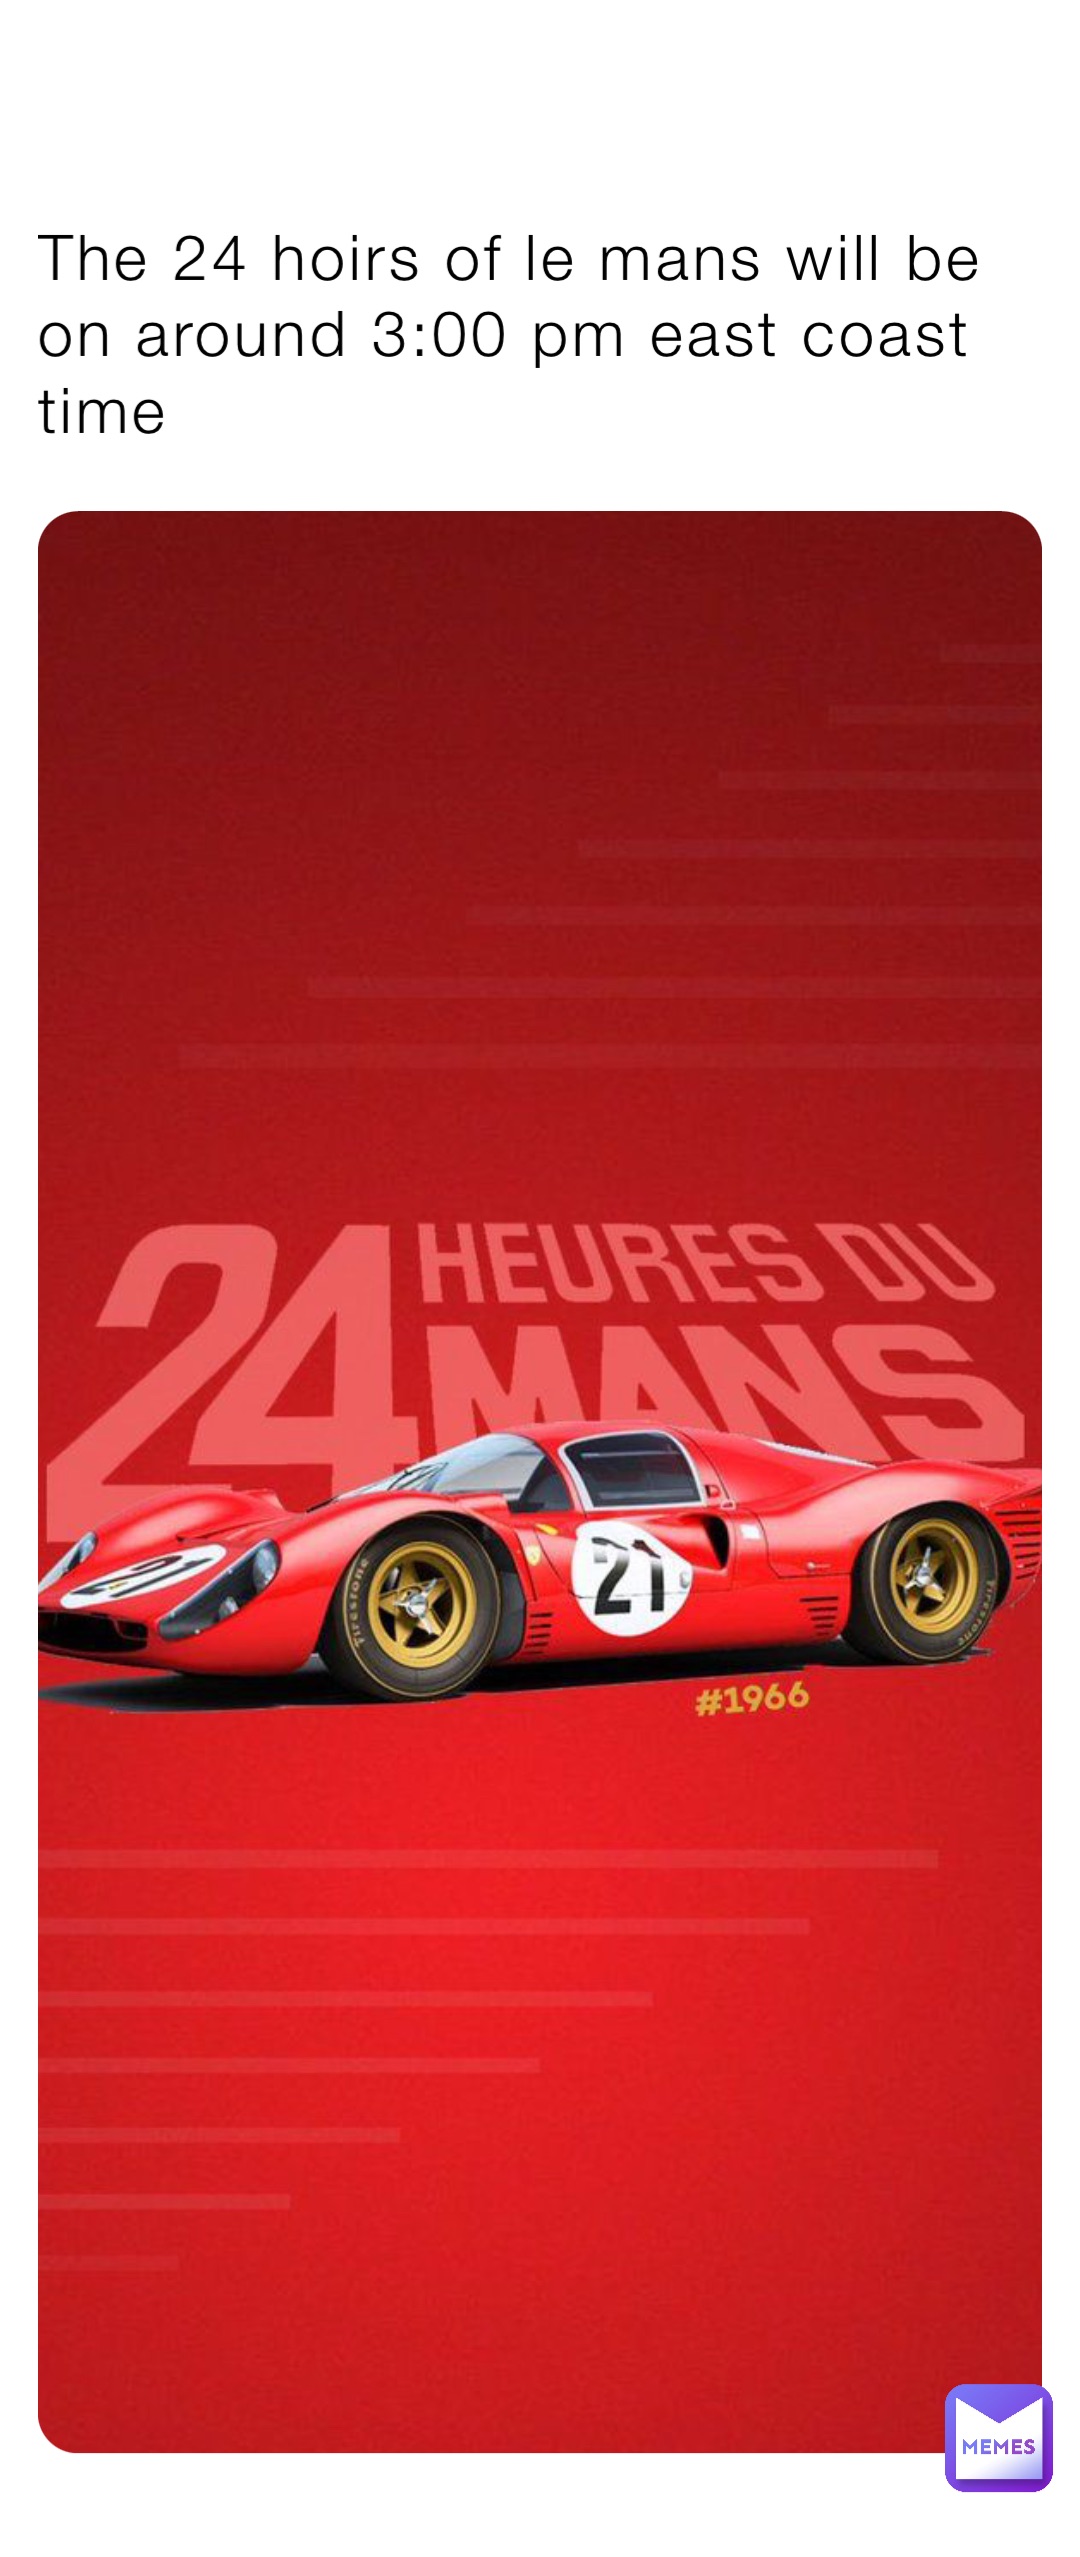 The 24 hoirs of le mans will be on around 3:00 pm east coast time